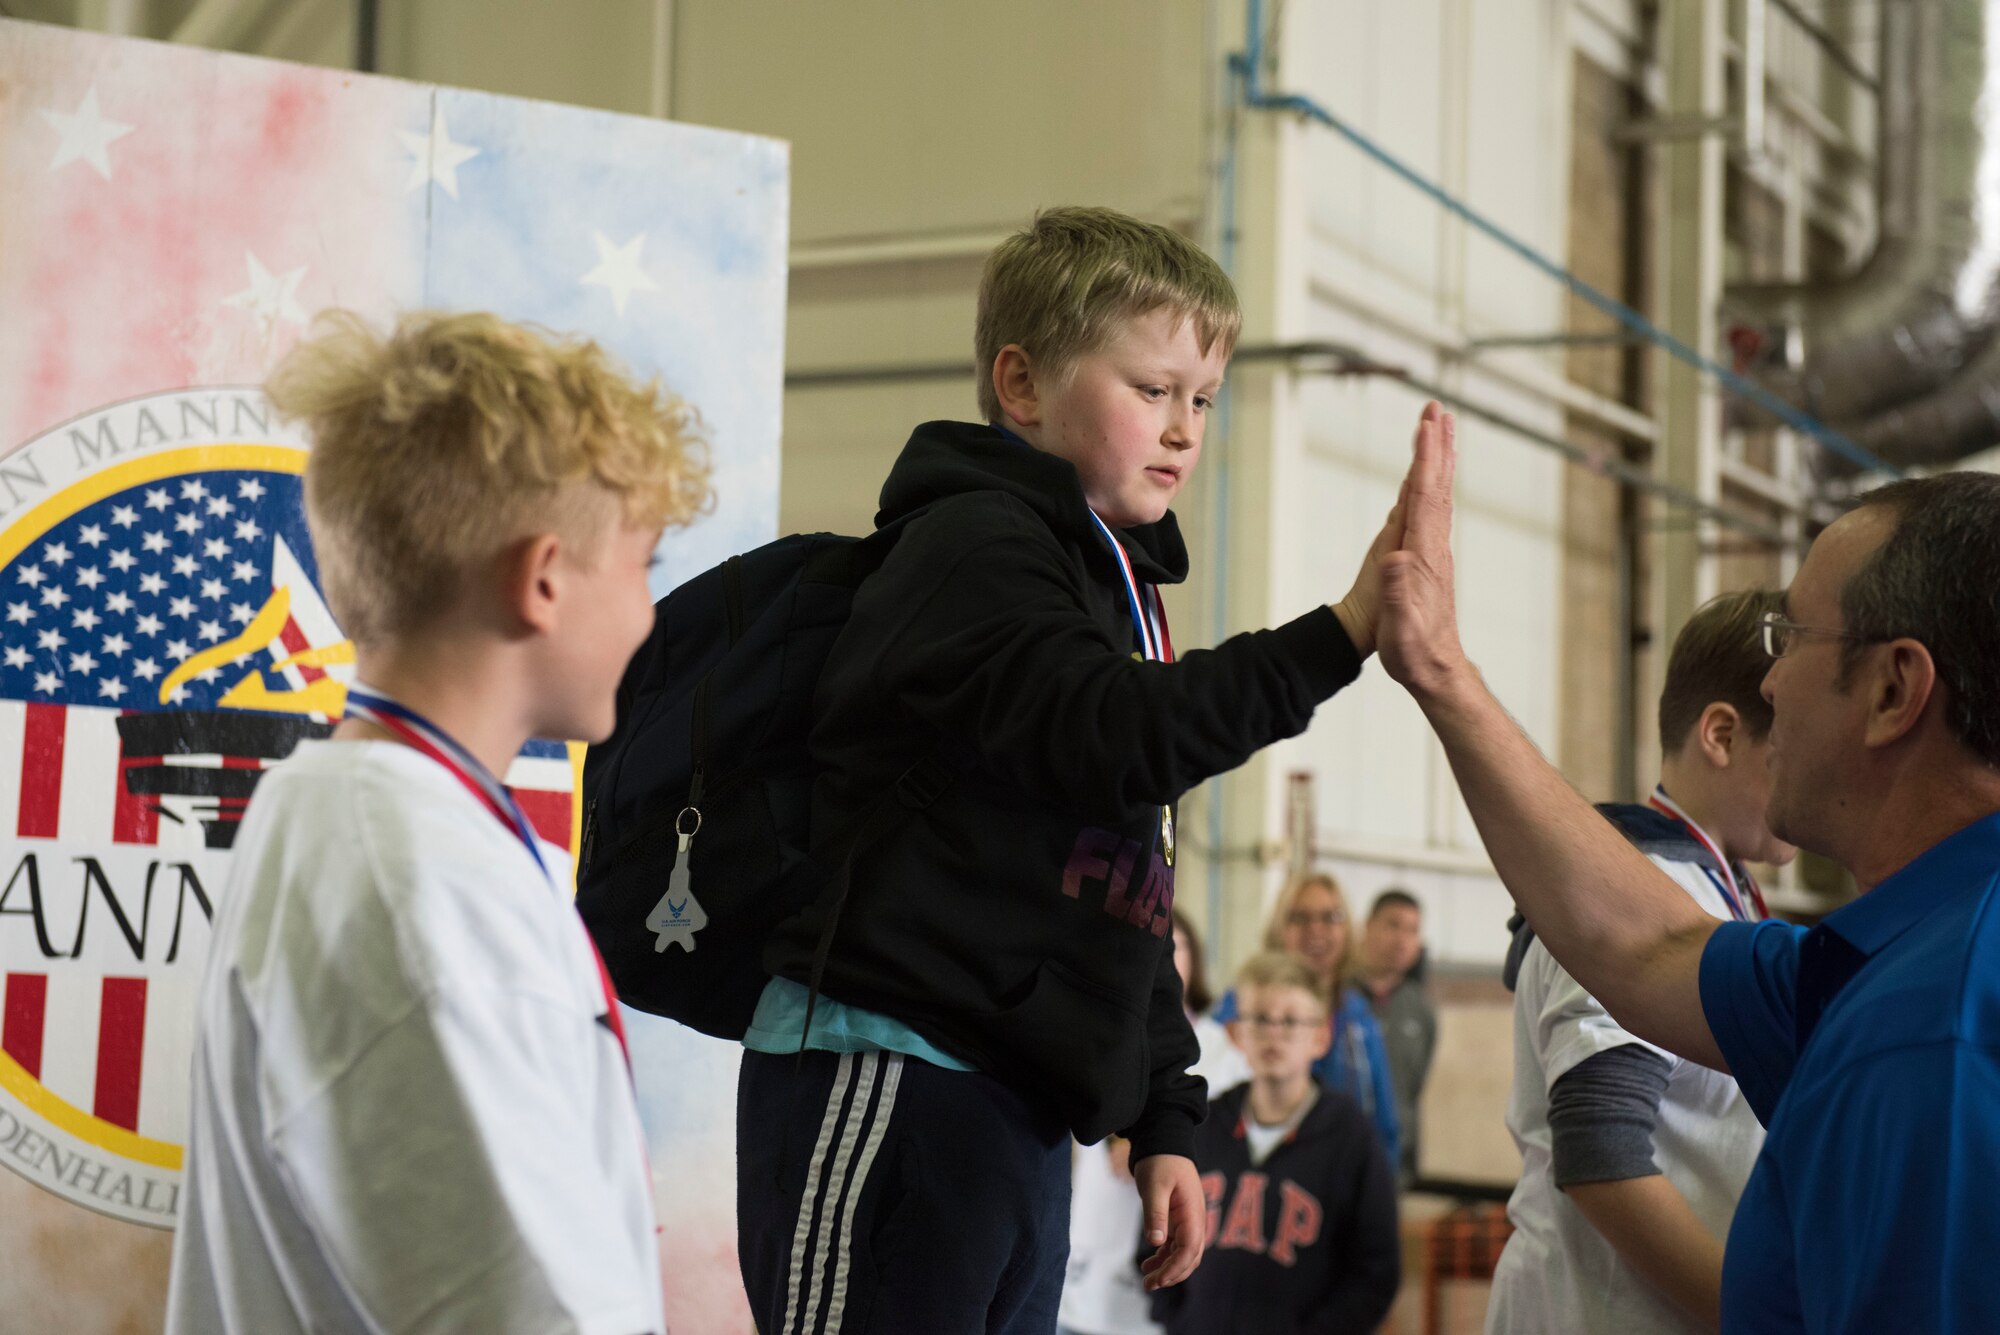 U.S. Air Force Chief Master Sgt. Clint Grizzell, 752nd Special Operations Group chief enlisted manager, high fives an athlete during the medal ceremony at the 37th Joan Mann Special Sports Day at RAF Mildenhall, England, Sept. 22, 2018.  Athletes from 28 local schools and organizations competed in 12 different sporting events, including the basketball shoot, obstacle course and football kick.  (U.S. Air Force photo by Senior Airman Lexie West)